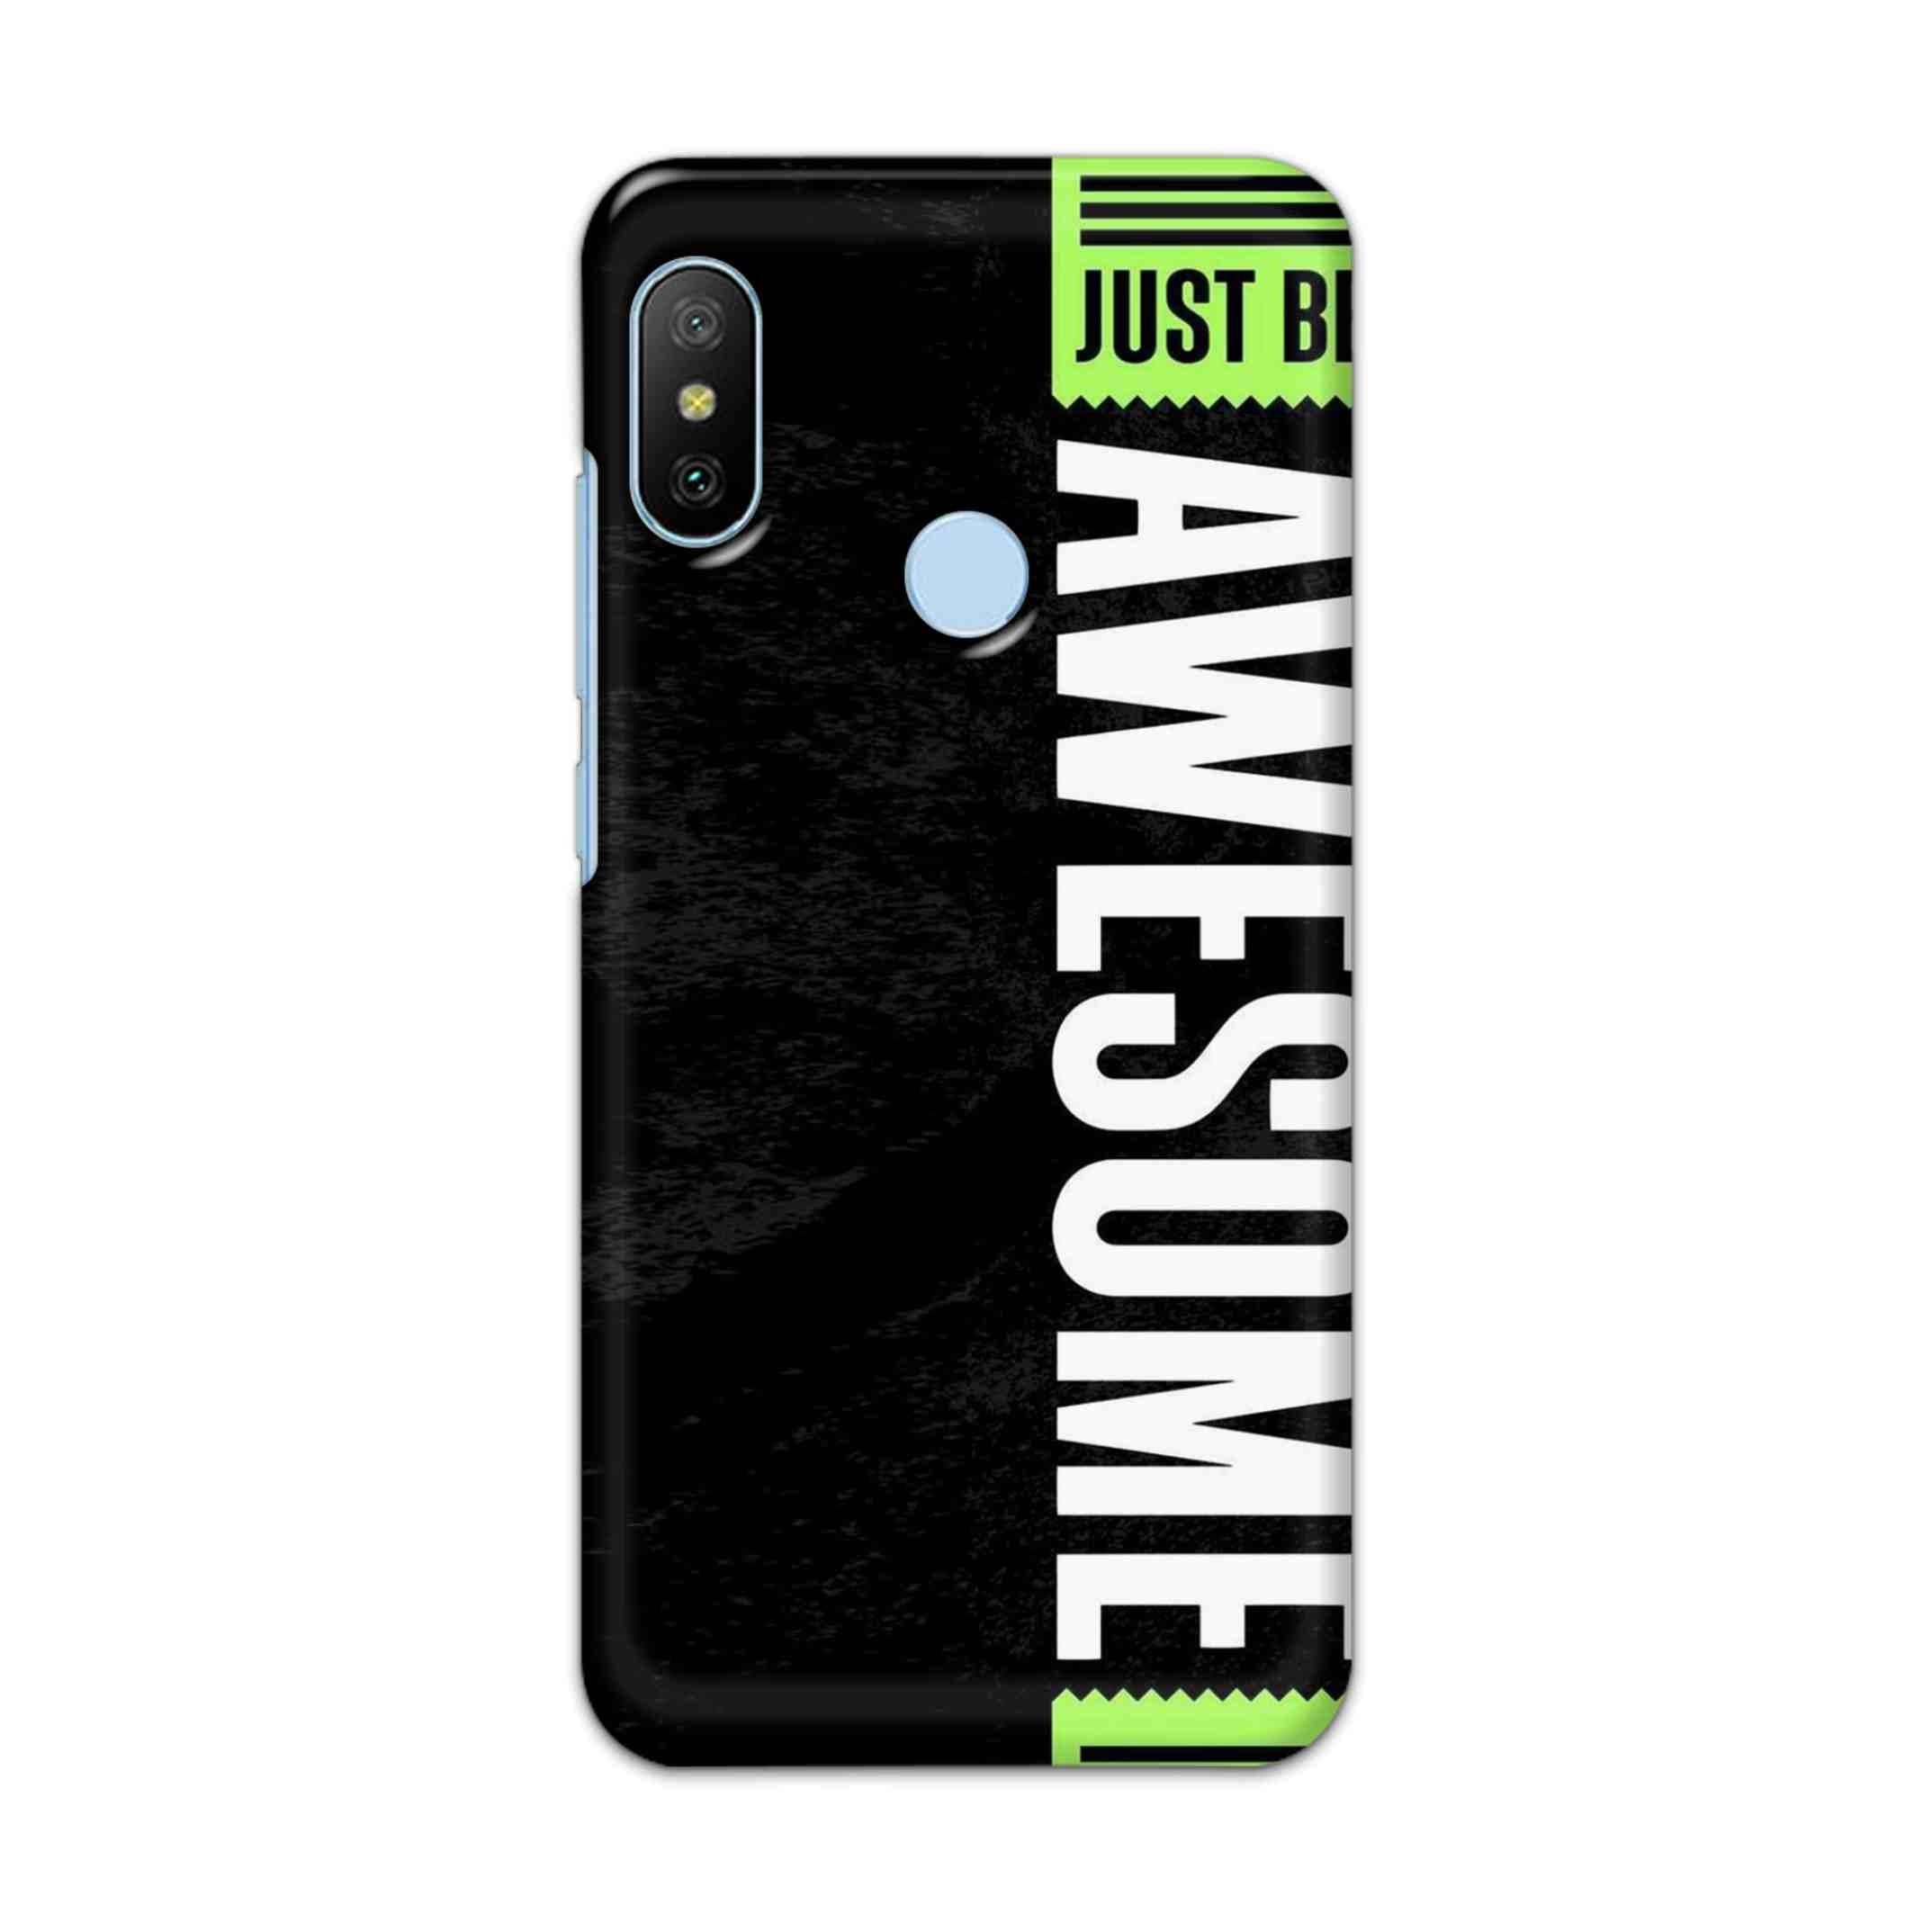 Buy Awesome Street Hard Back Mobile Phone Case/Cover For Xiaomi Redmi 6 Pro Online